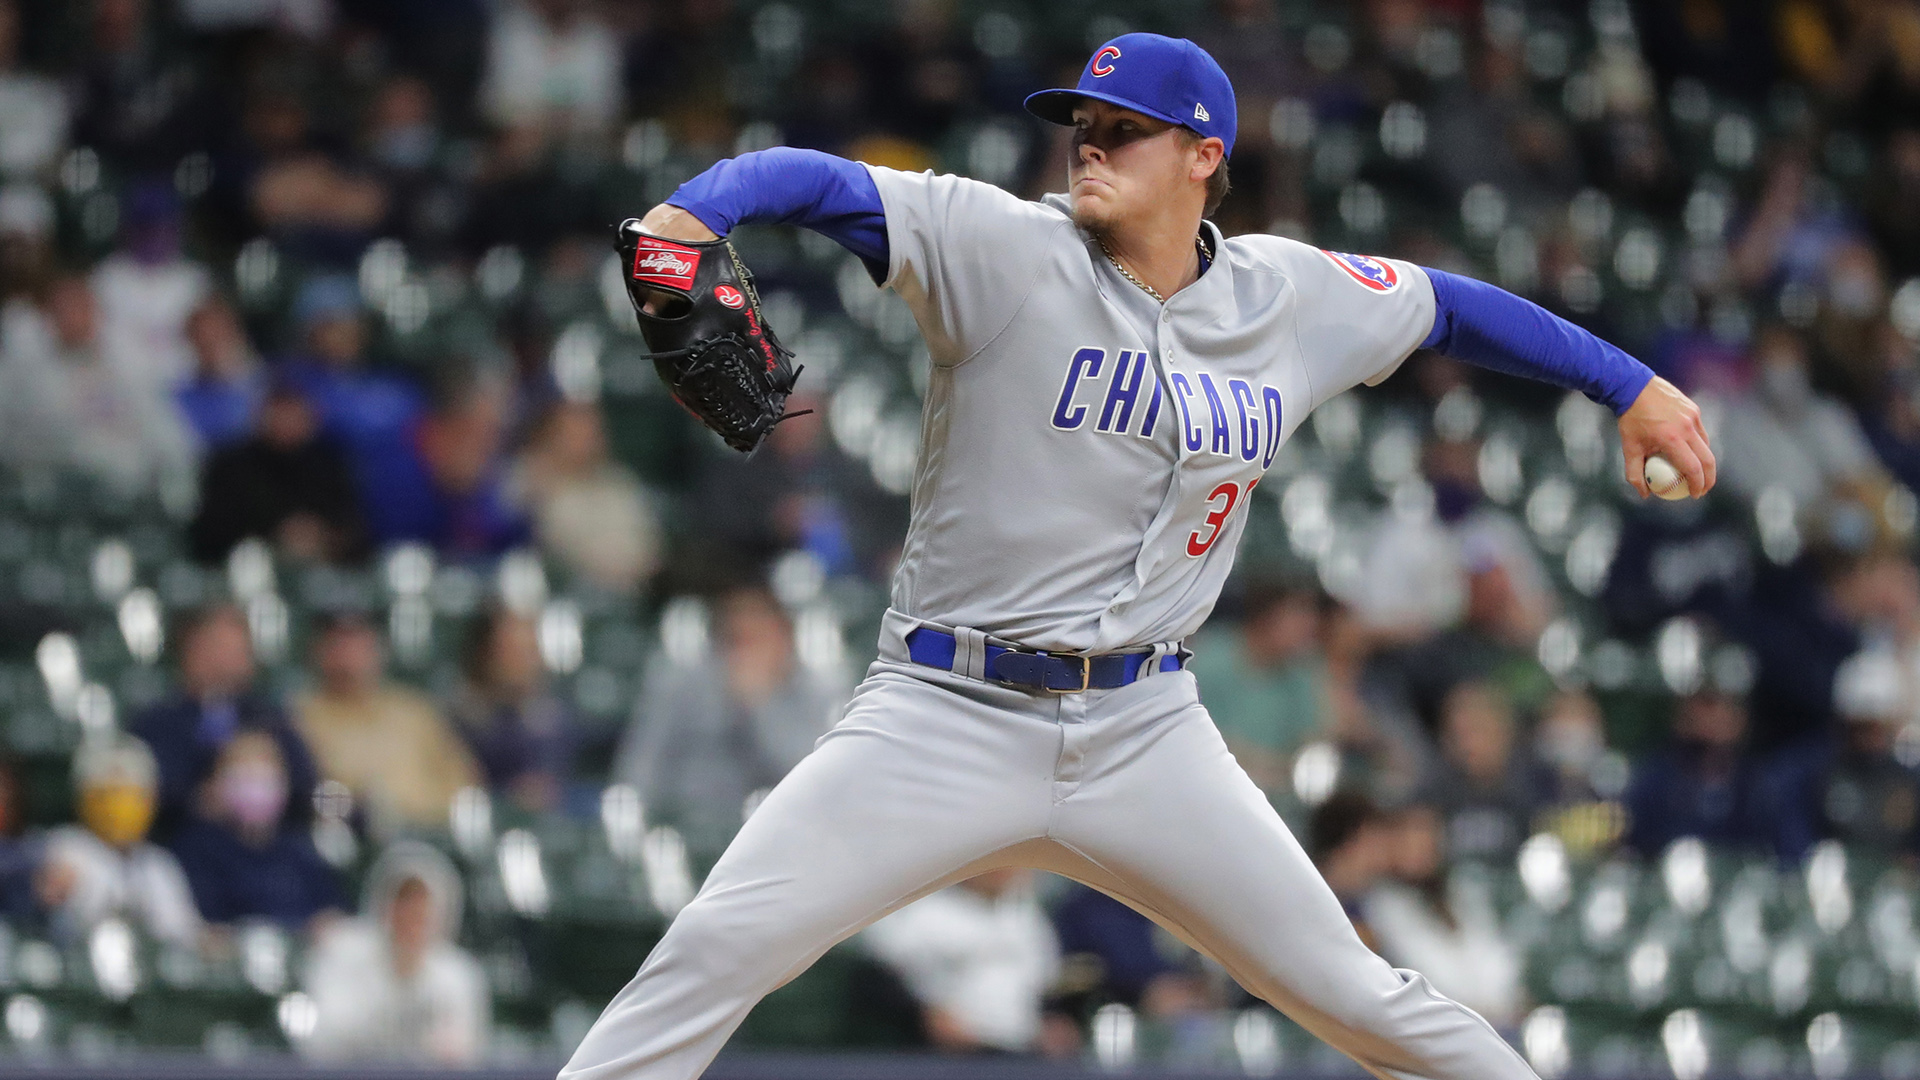 Cubs' Justin Steele gives up 7 runs in 2 innings in 20-5 loss to